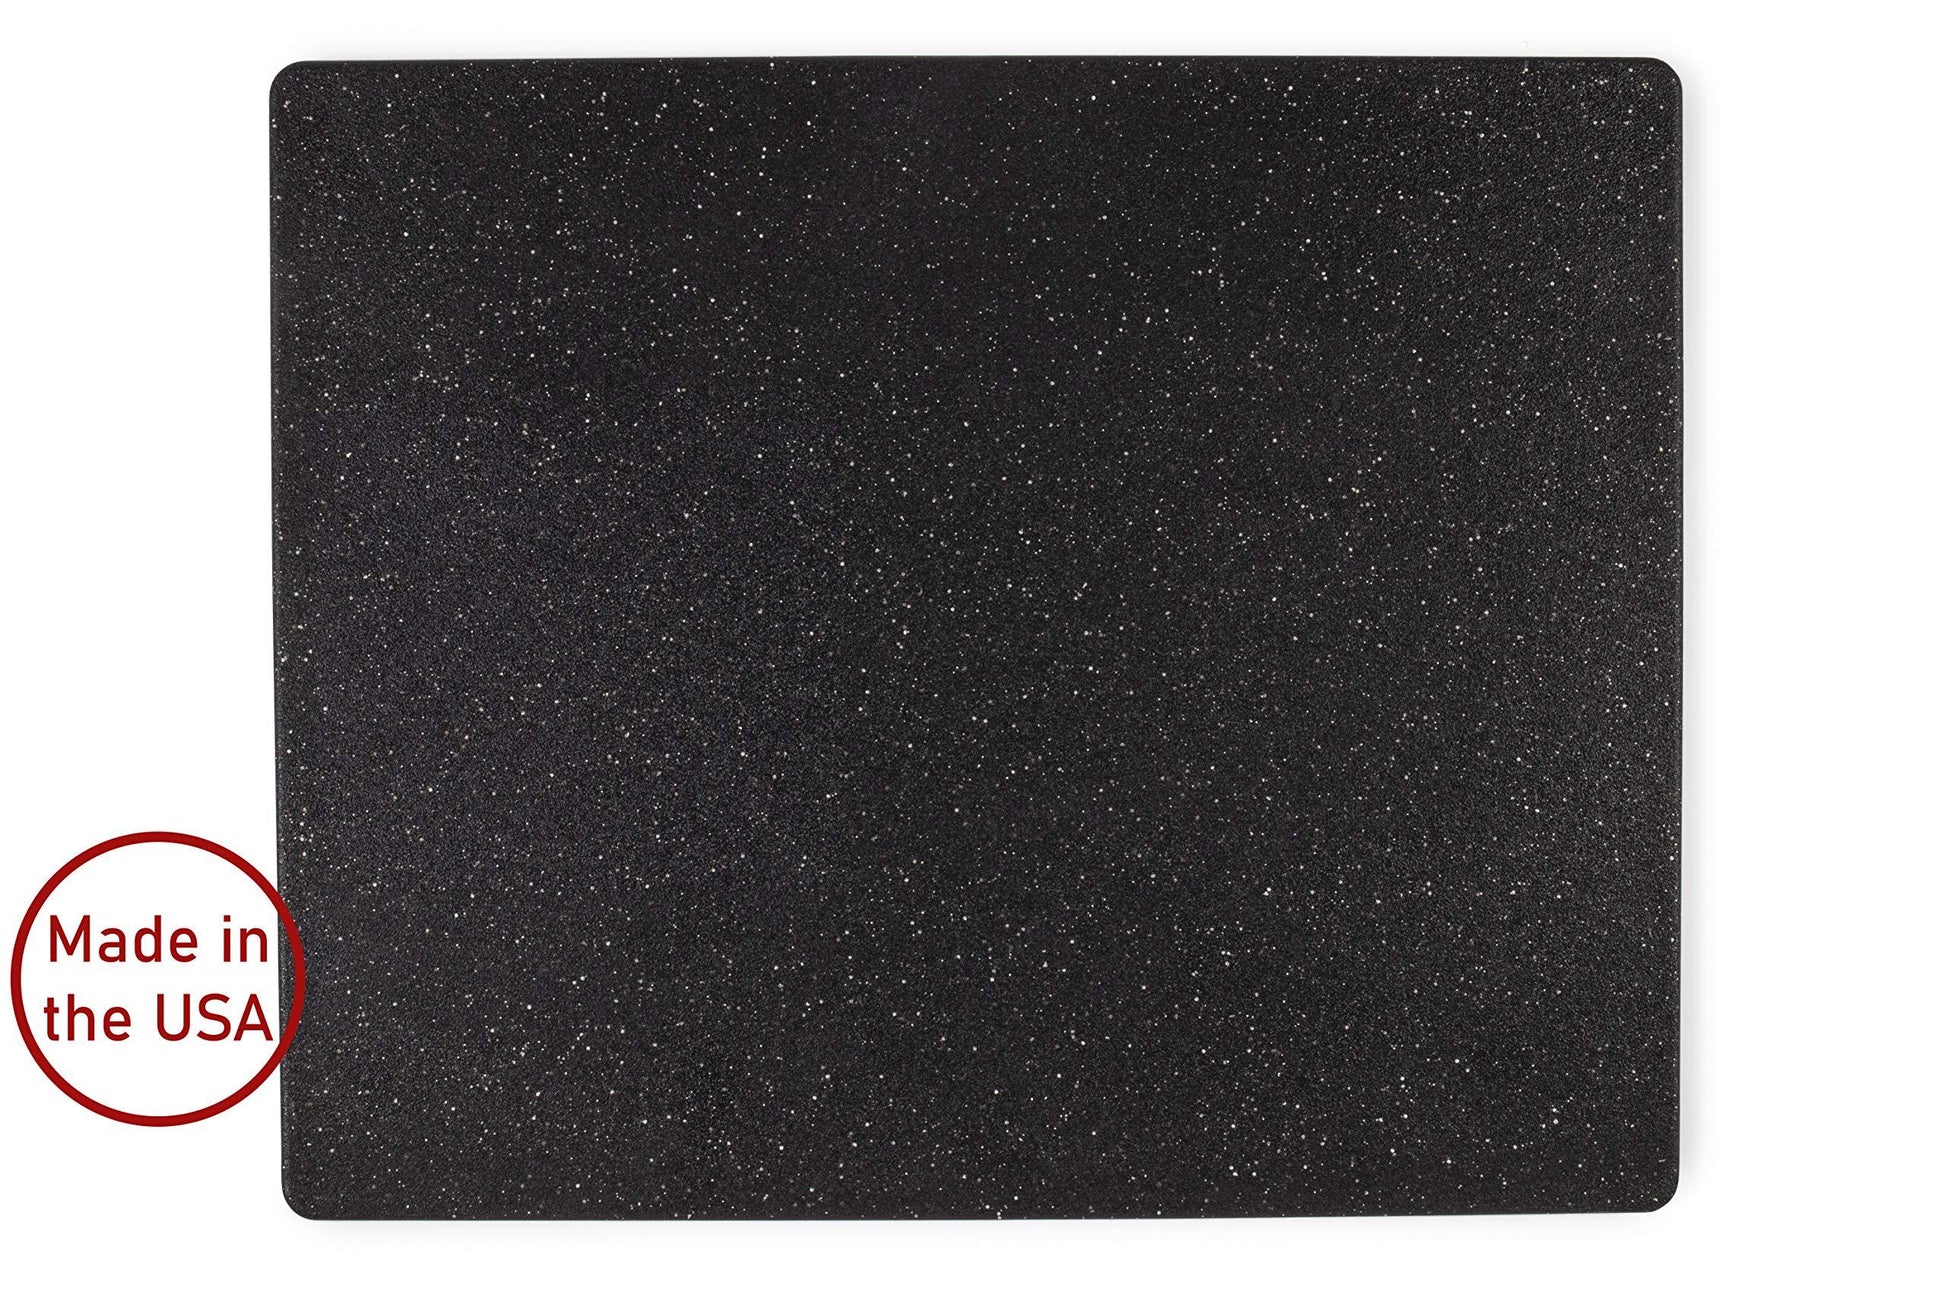 Dexas Superboard Pastry Board (No Handle), 14 by 17 inches, Midnight Granite Color - CookCave